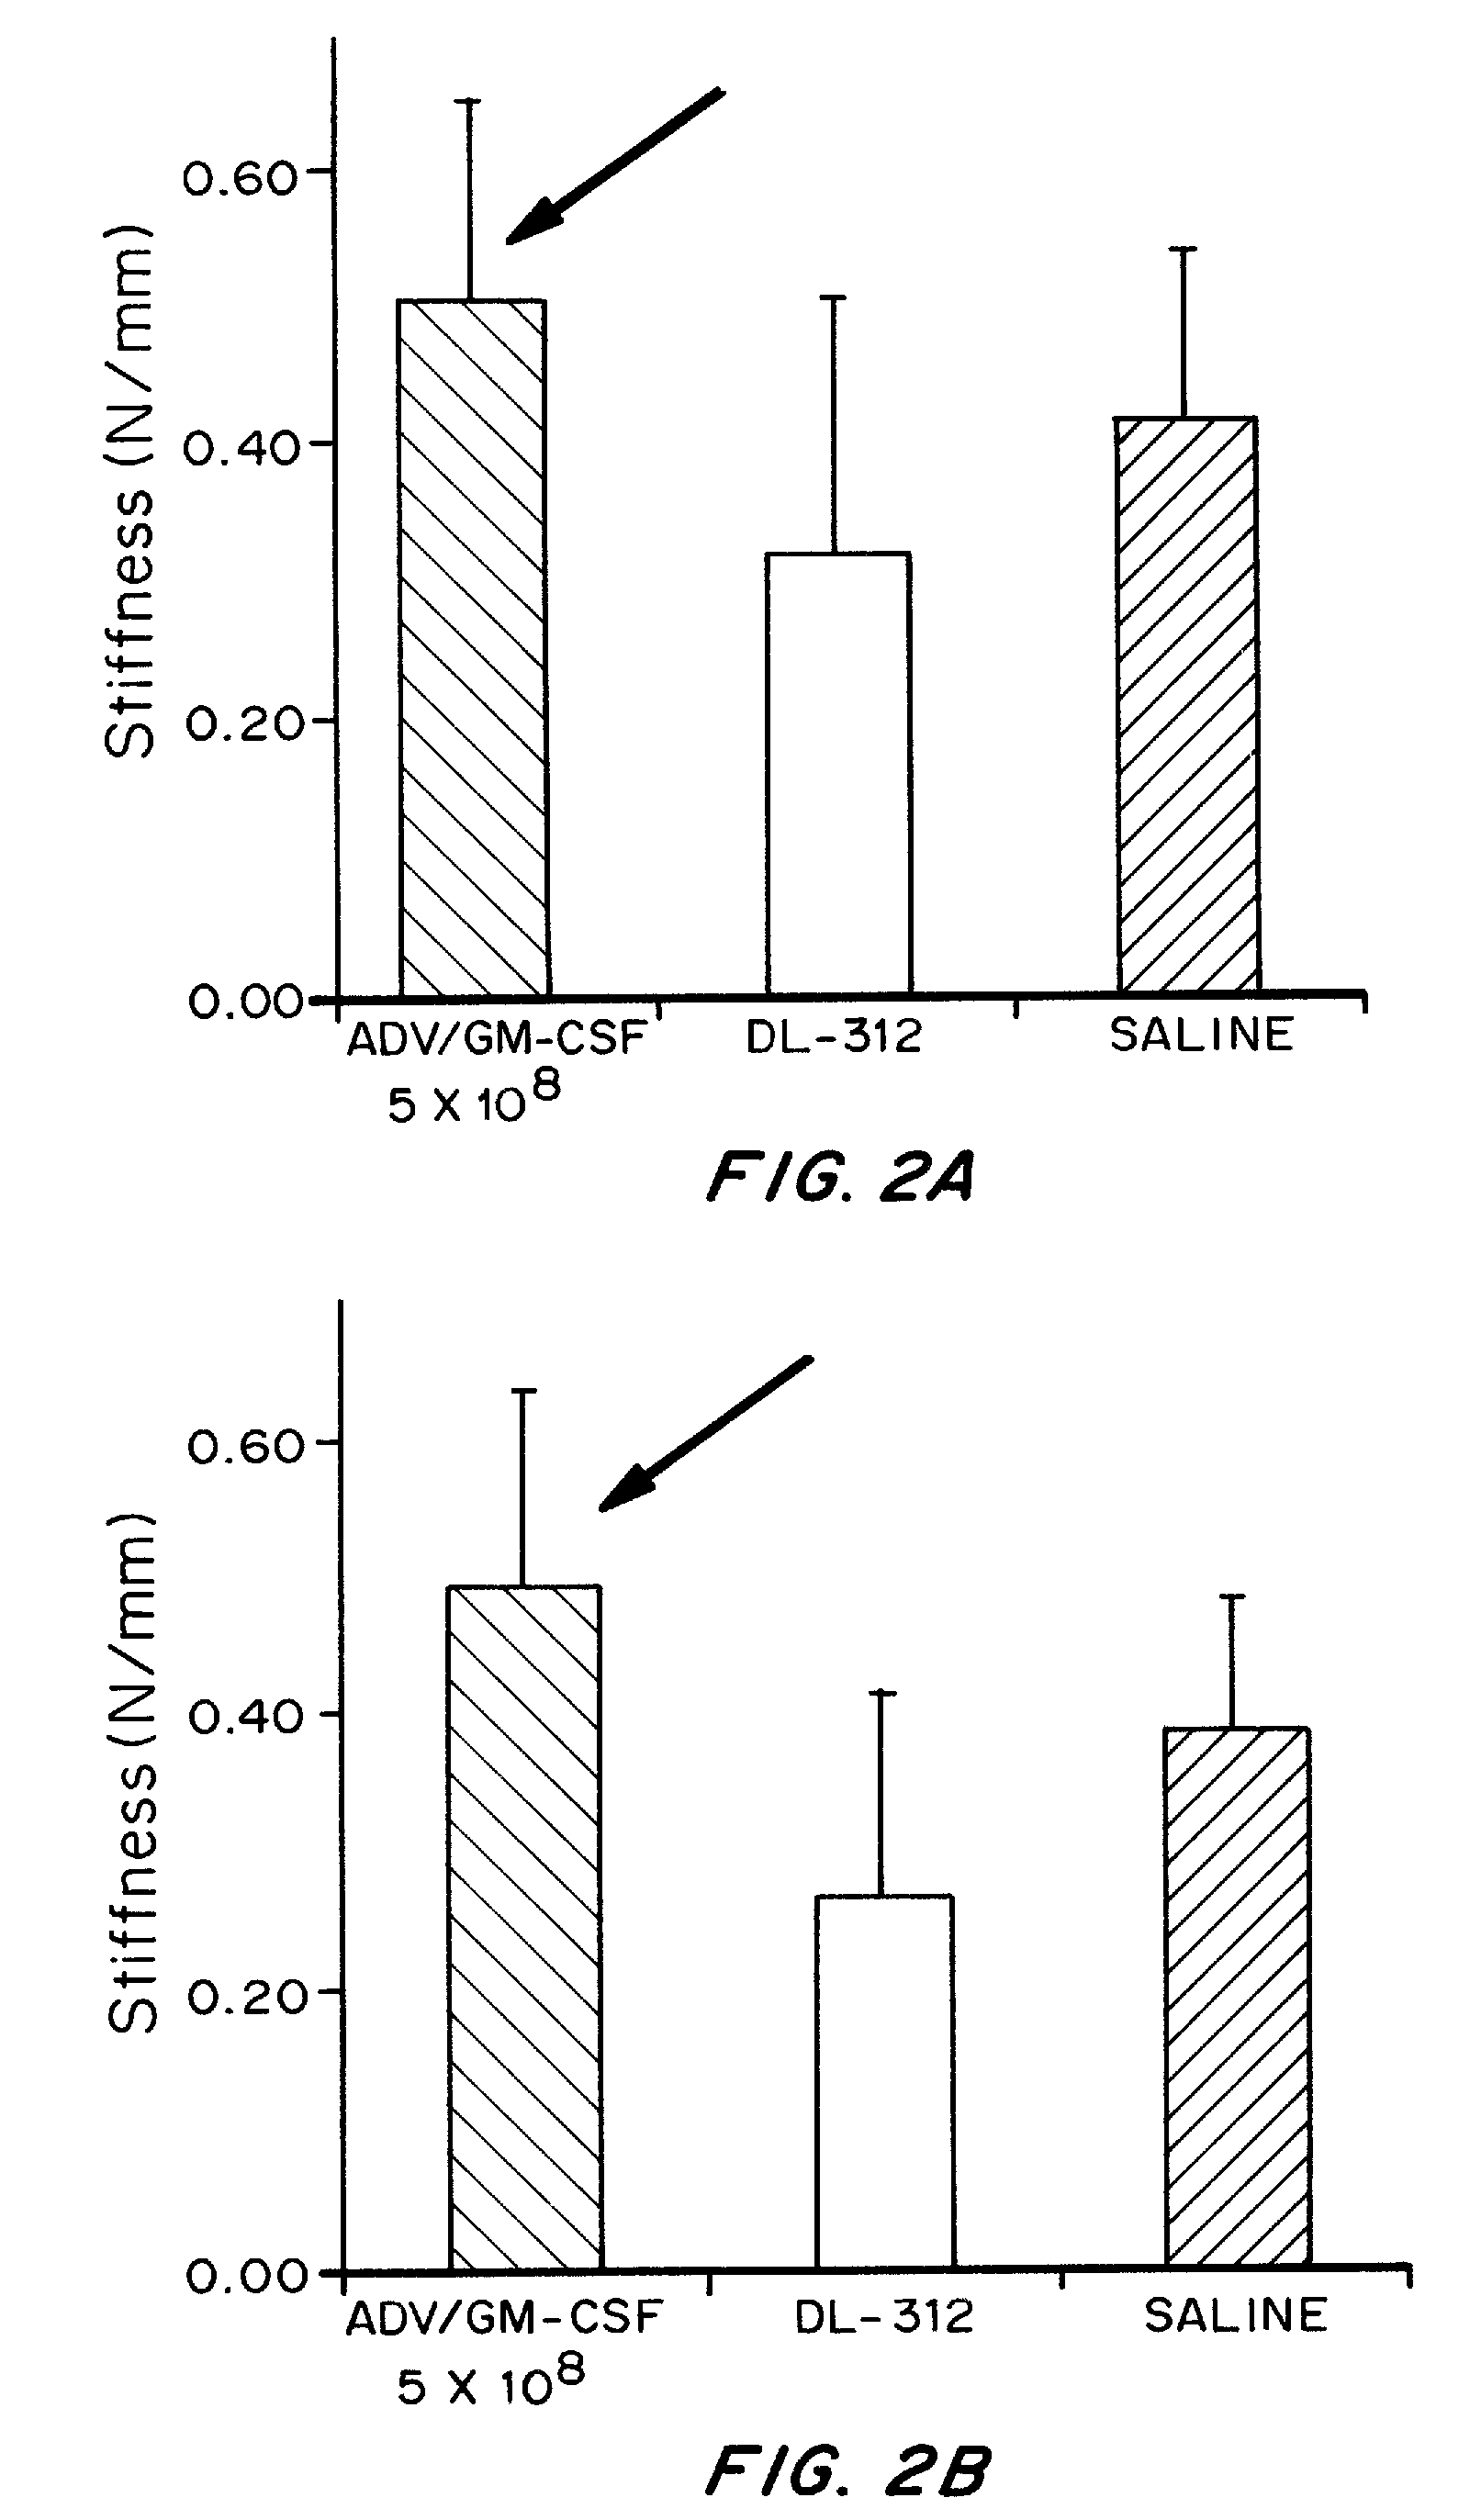 GM-CSF cosmeceutical compositions and methods of use thereof